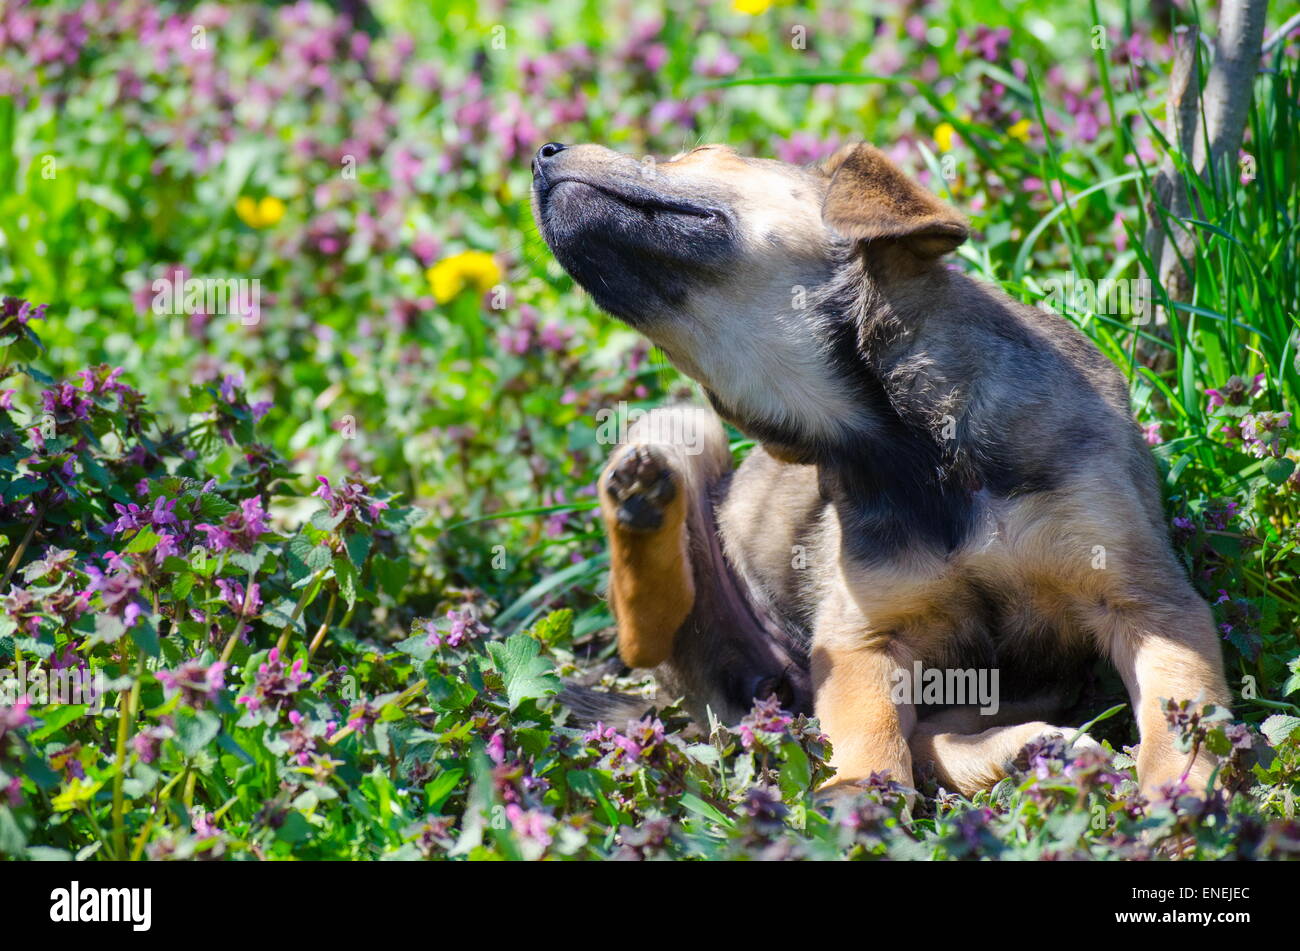 Mix breed puppy scratching among the grass leaves and colorful field flowers Stock Photo